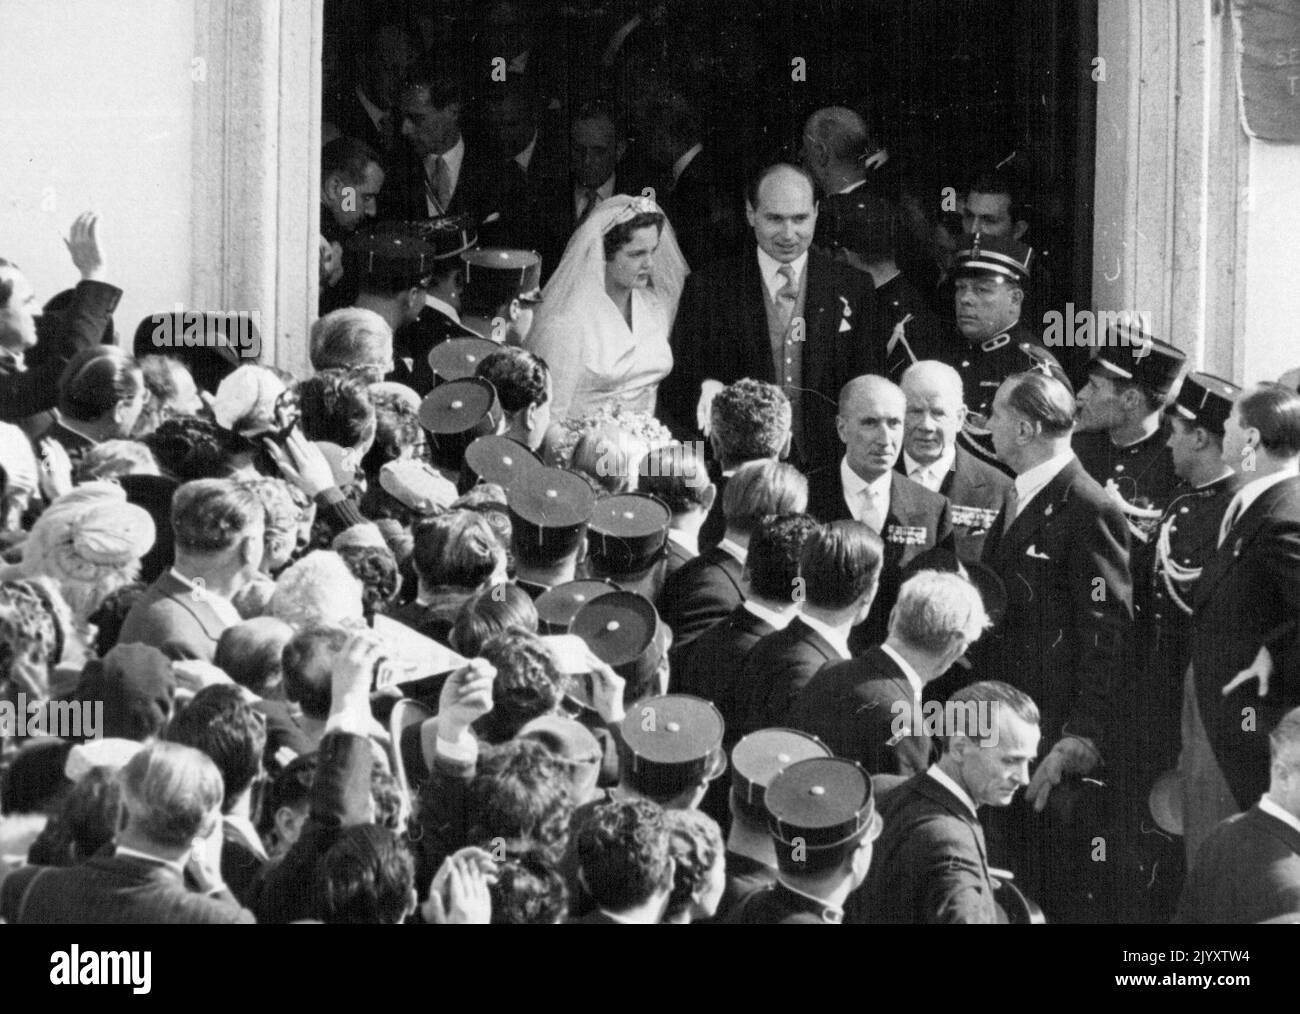 PS: The bride and bridegroom, Princess Maria Pia of Italy and Prince Alexander of Yugoslavia, after their wedding at the parish church of Cascais, near Estoril. February 15, 1955. (Photo by Daily Mirror) Stock Photo